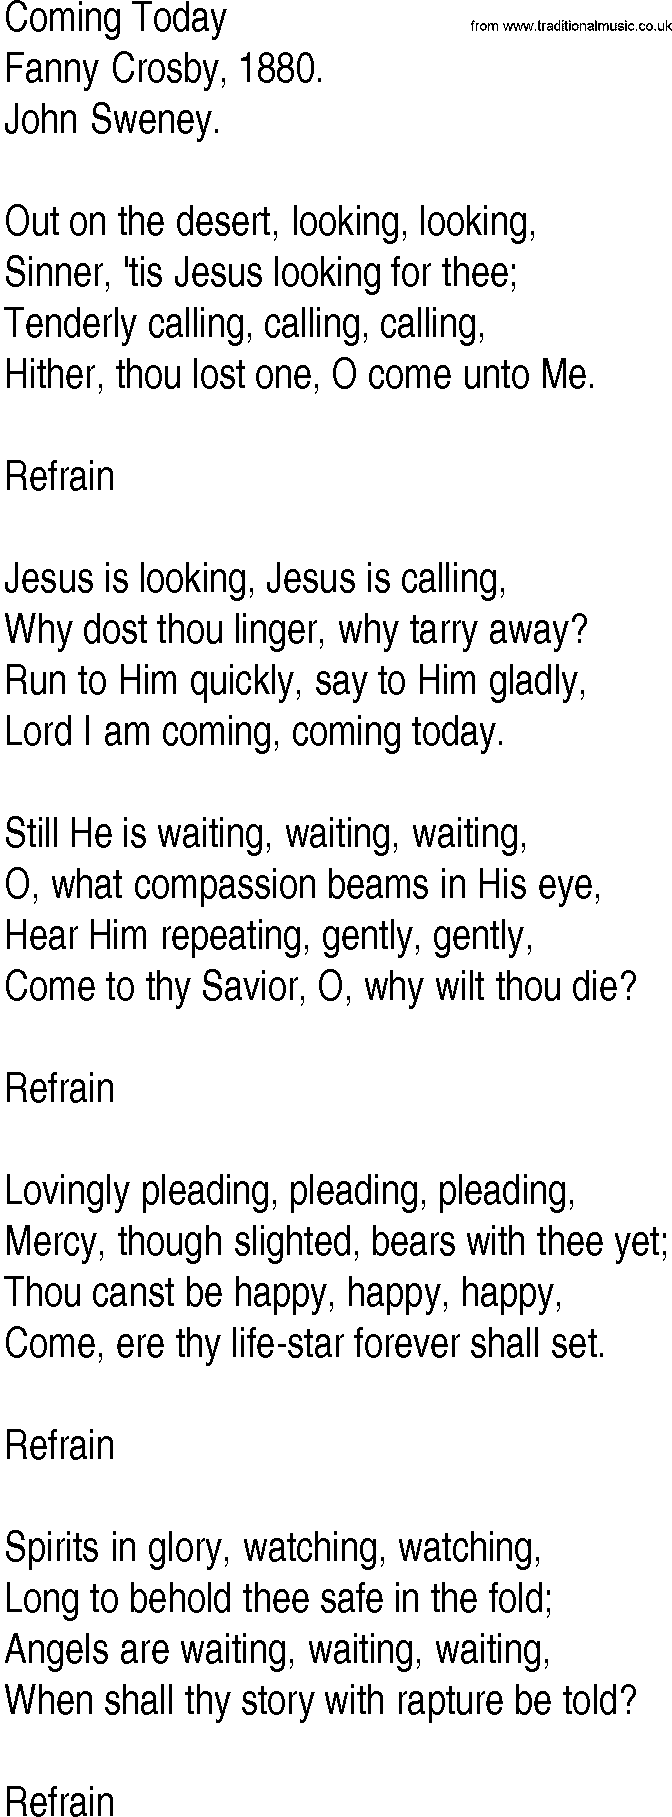 Hymn and Gospel Song: Coming Today by Fanny Crosby lyrics